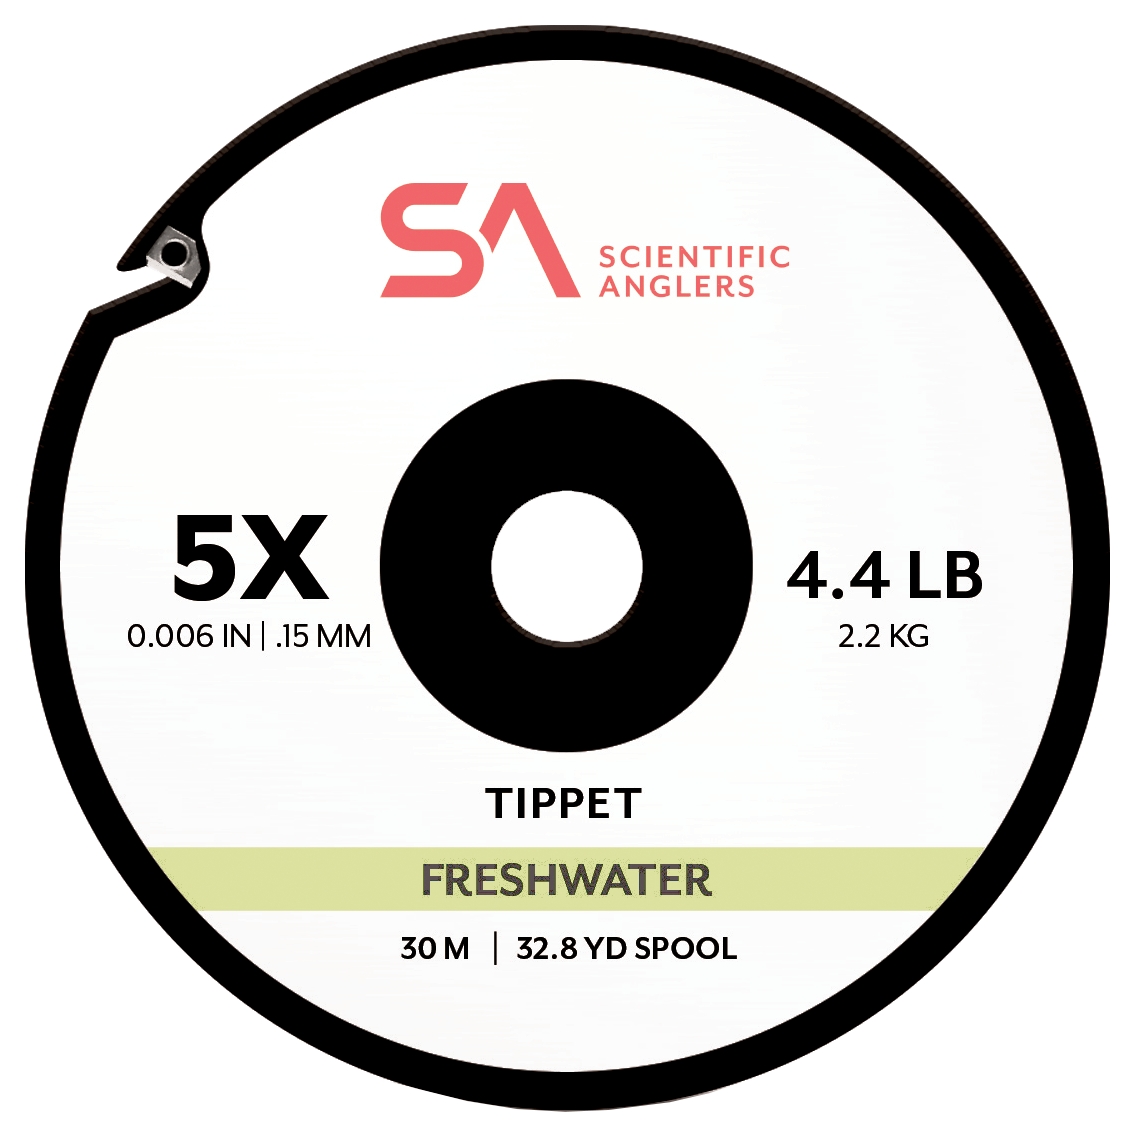 Scientific Angler Freshwater Tippet - 5X